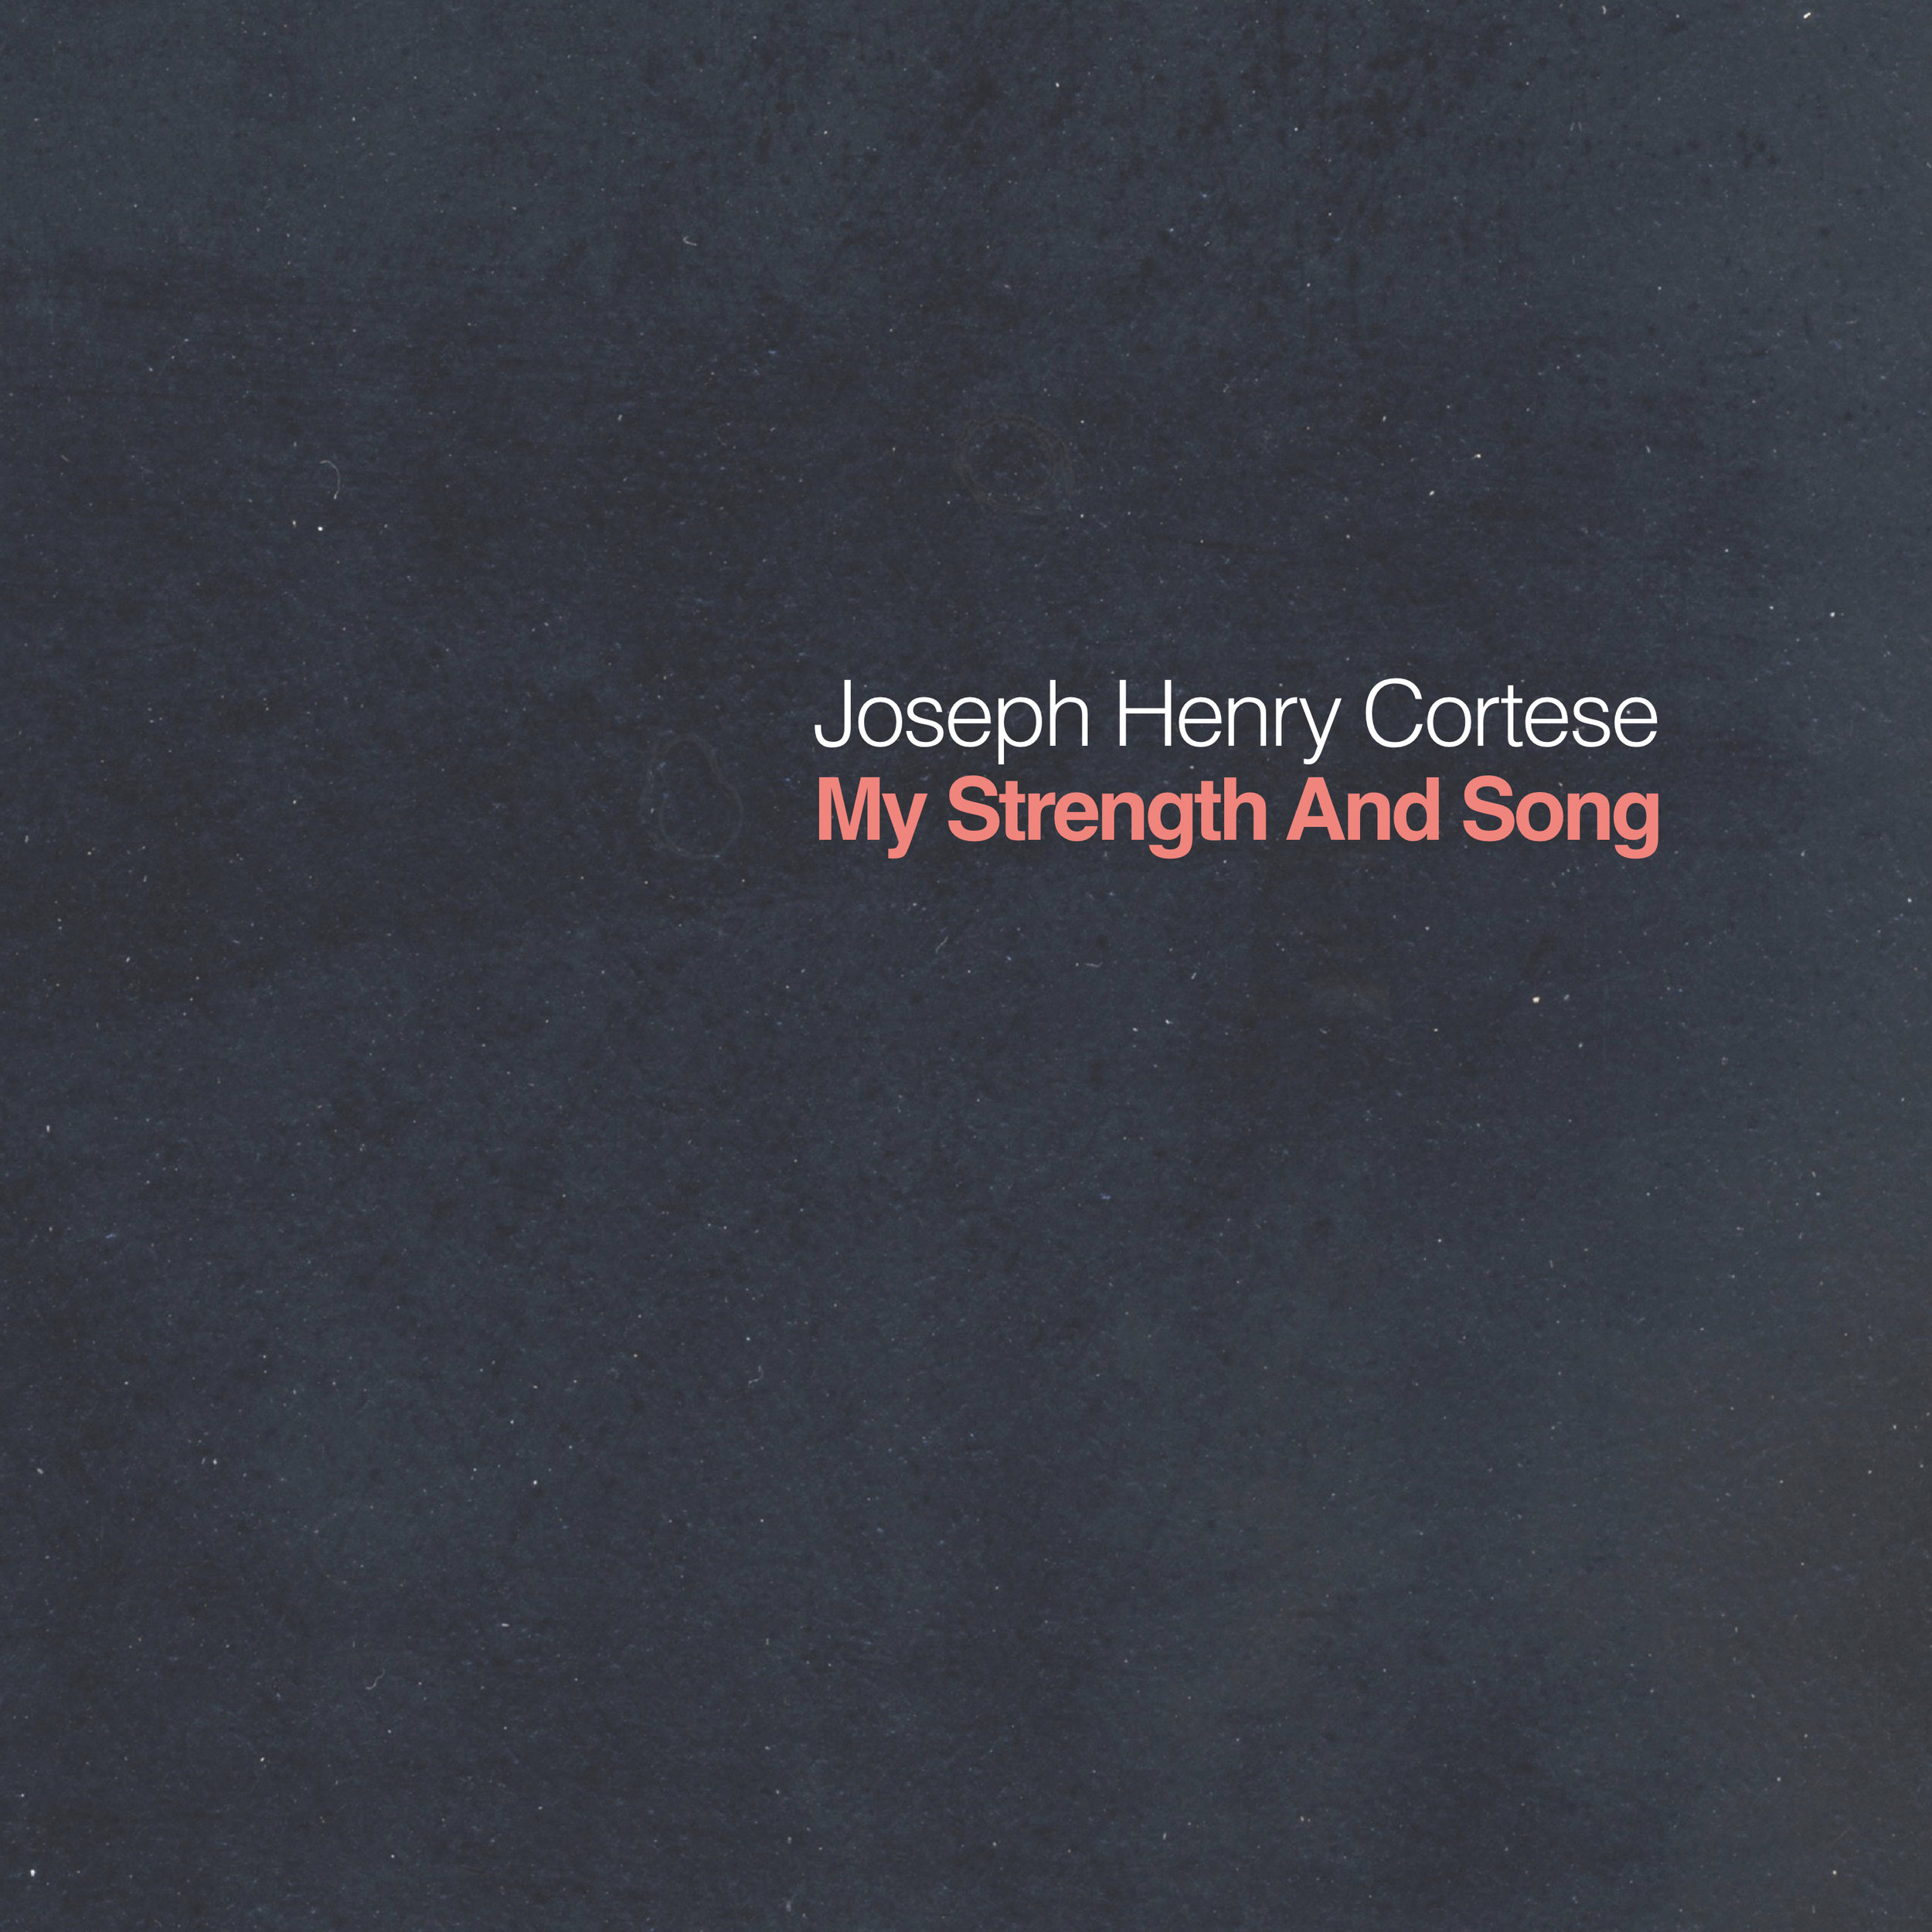 My Strength And Song CD Cover Updated.jpg